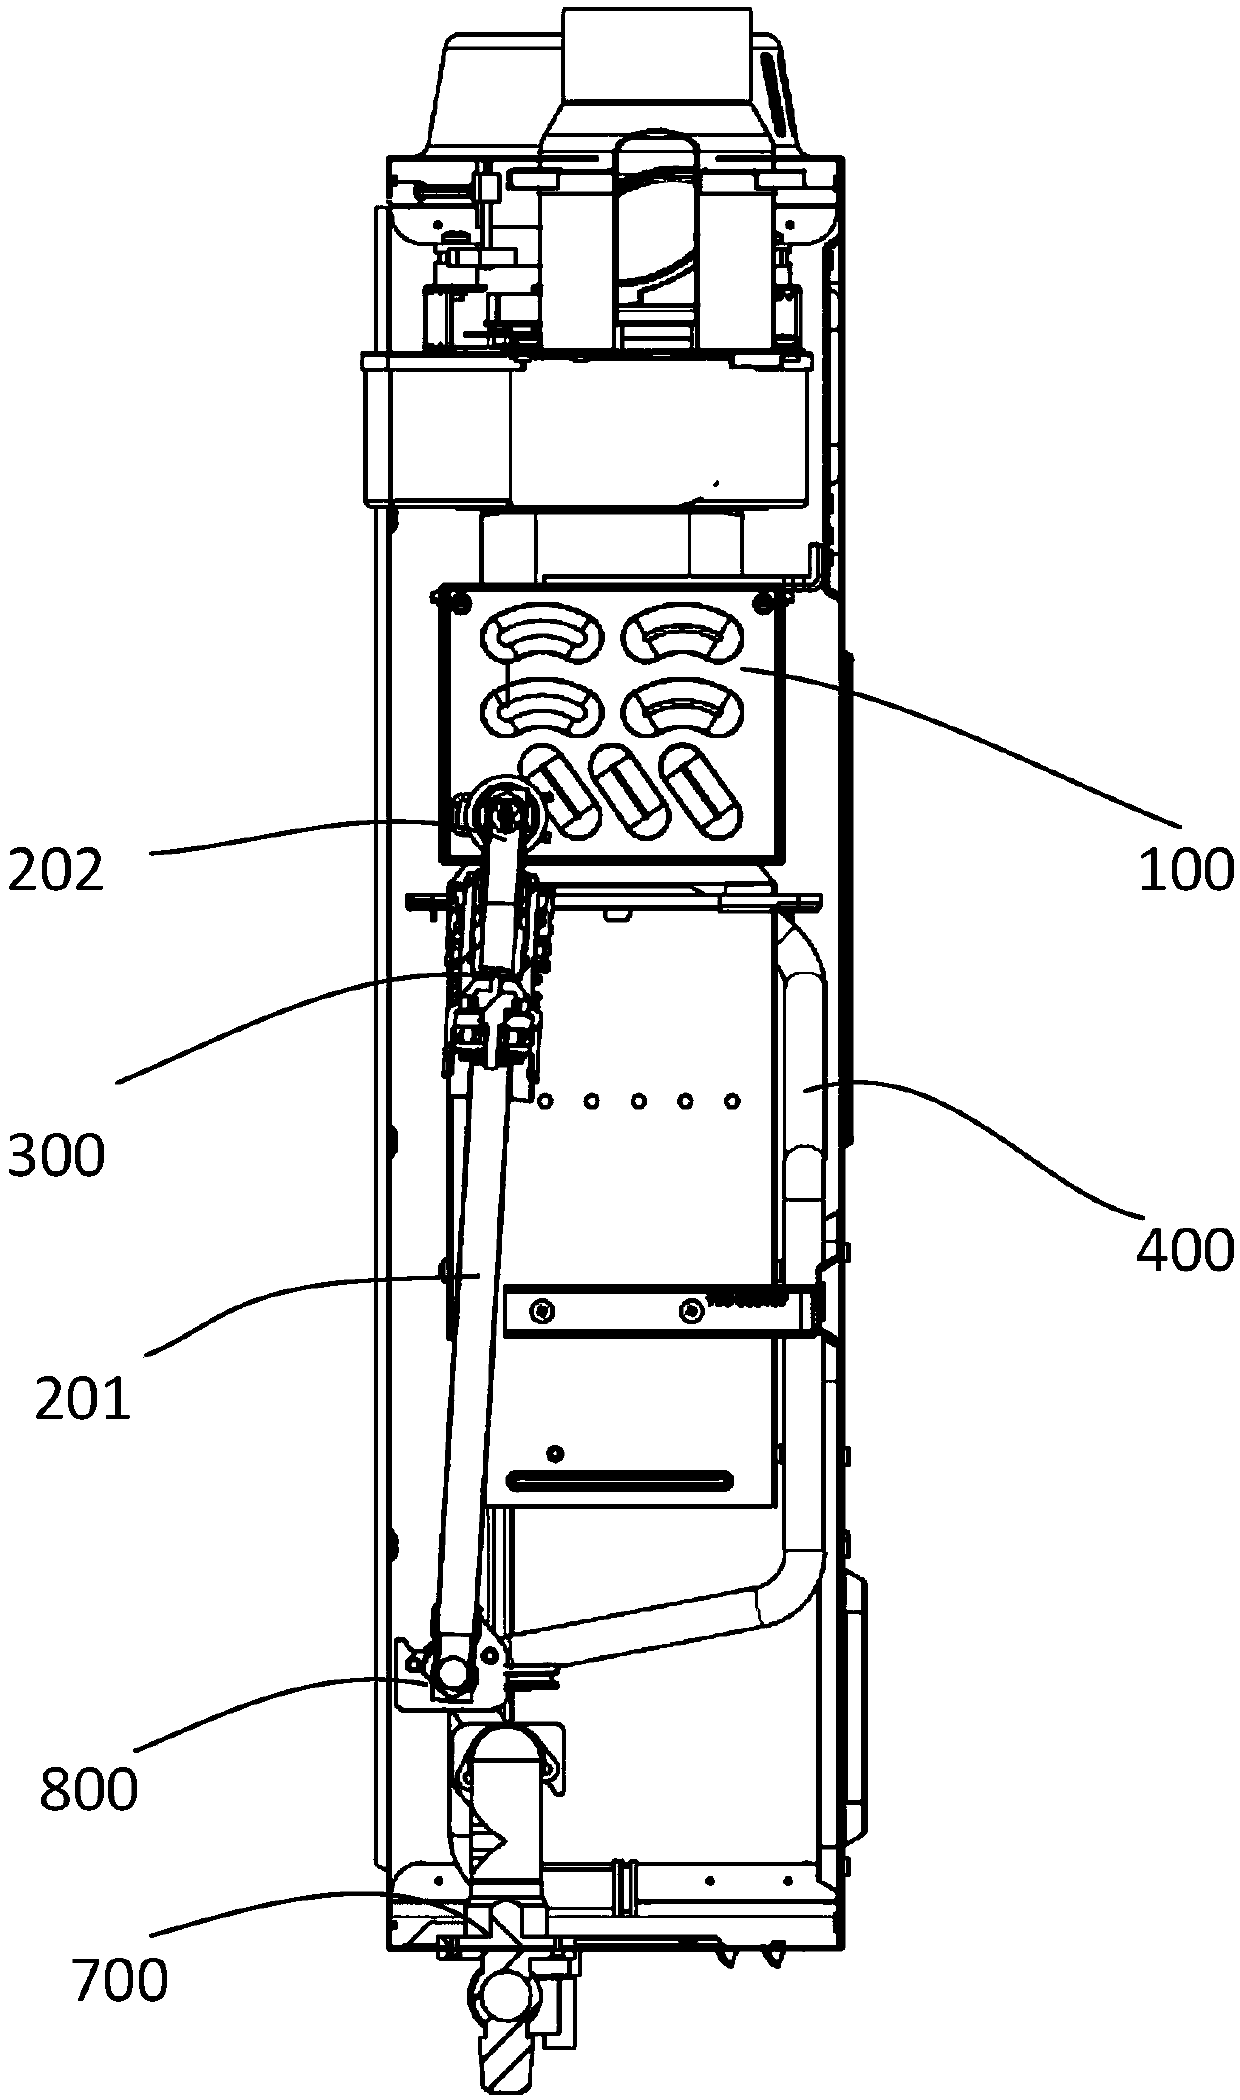 Fuel gas hot water device and anti-freezing valve